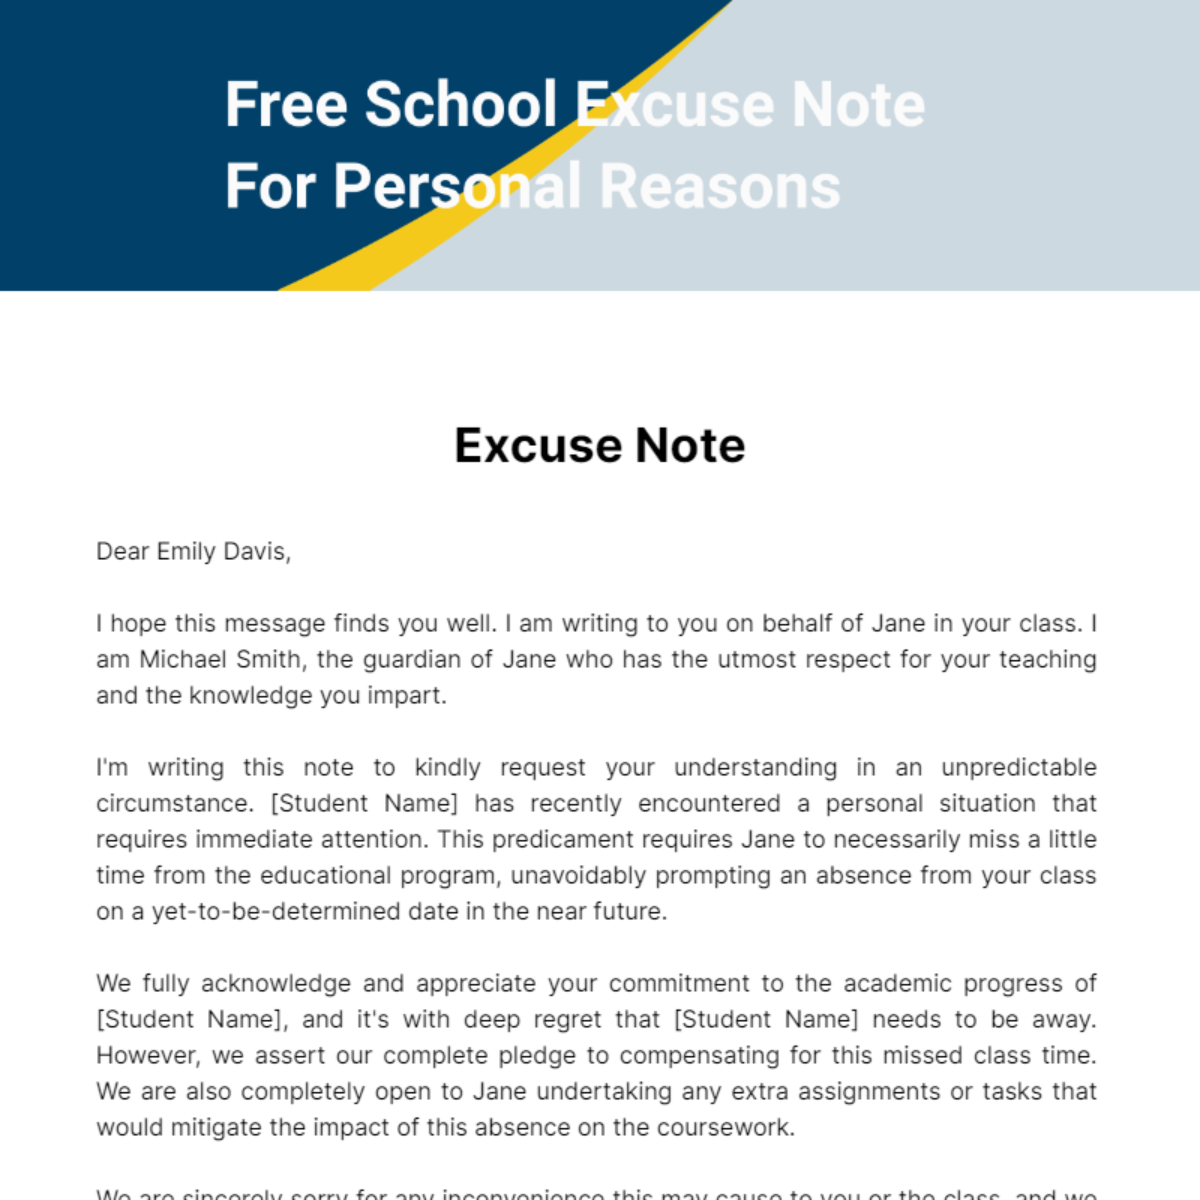 Free School Excuse Note For Personal Reasons Template